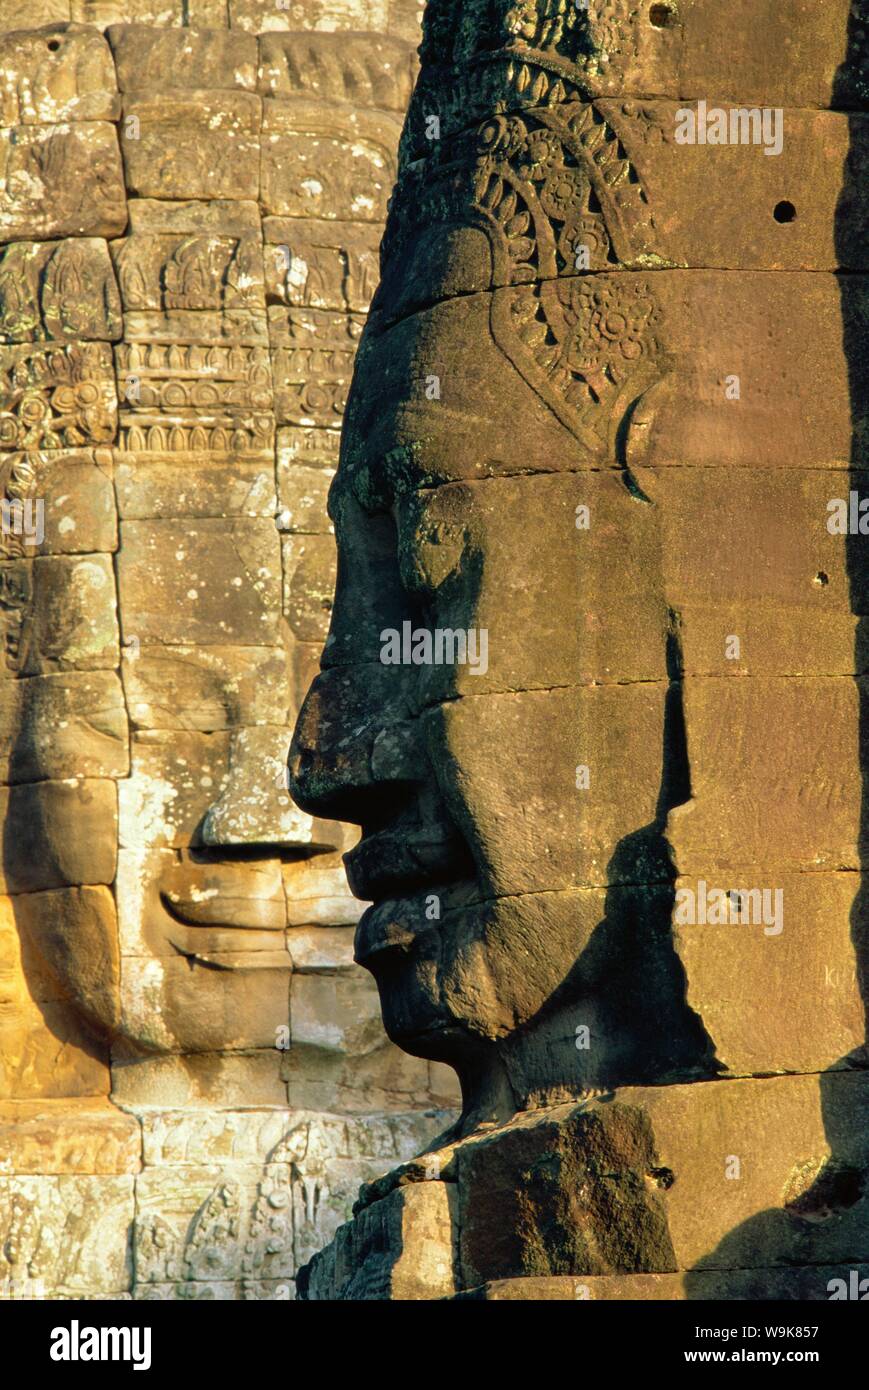 Stone heads typifying Cambodia on the Bayon Temple at Angkor Wat, Siem Reap, Cambodia, Asia. Stock Photo